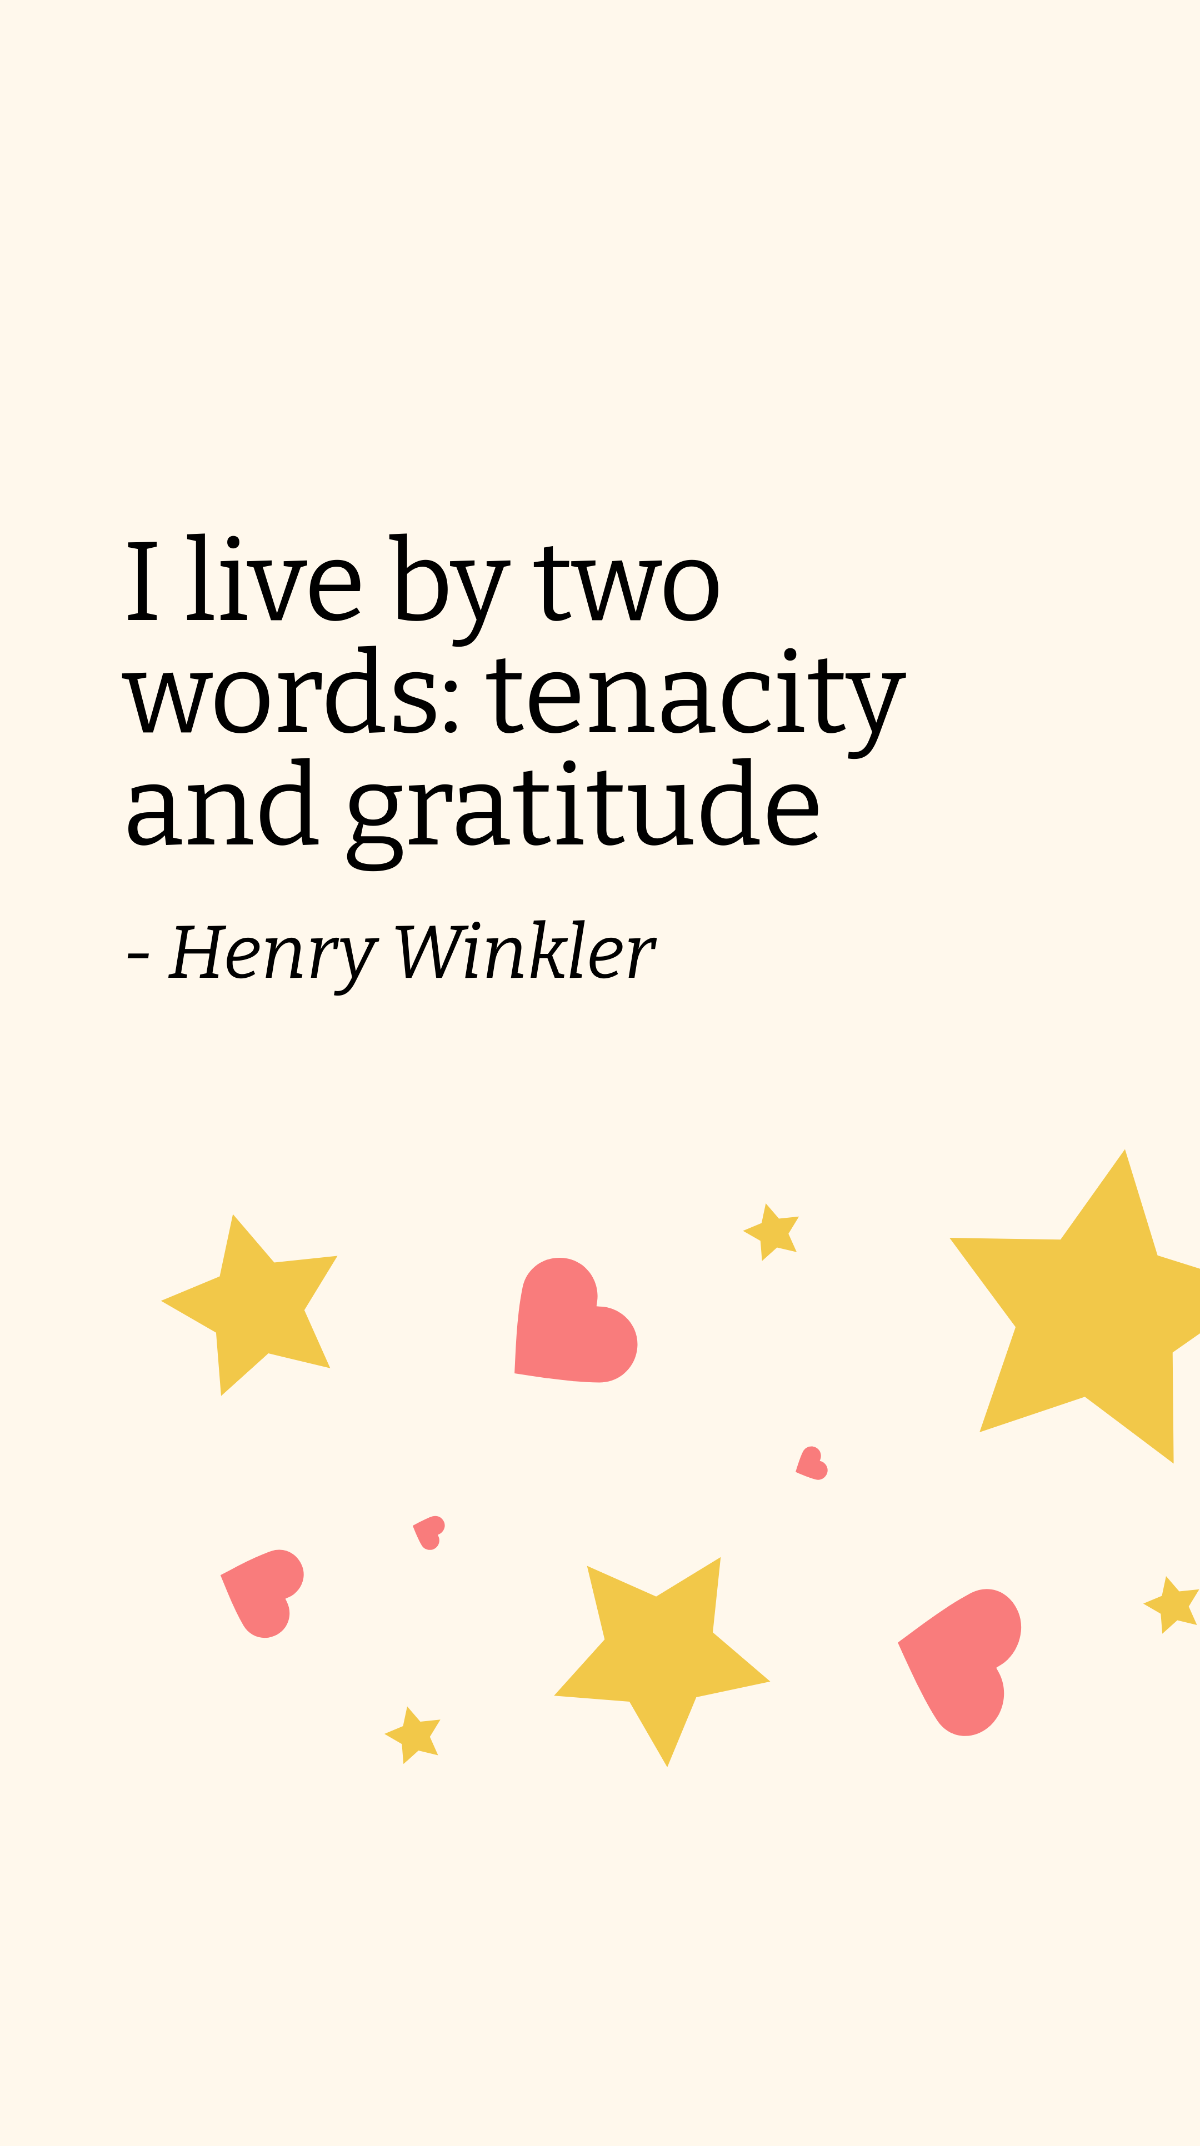 Free Henry Winkler - I live by two words: tenacity and gratitude Template